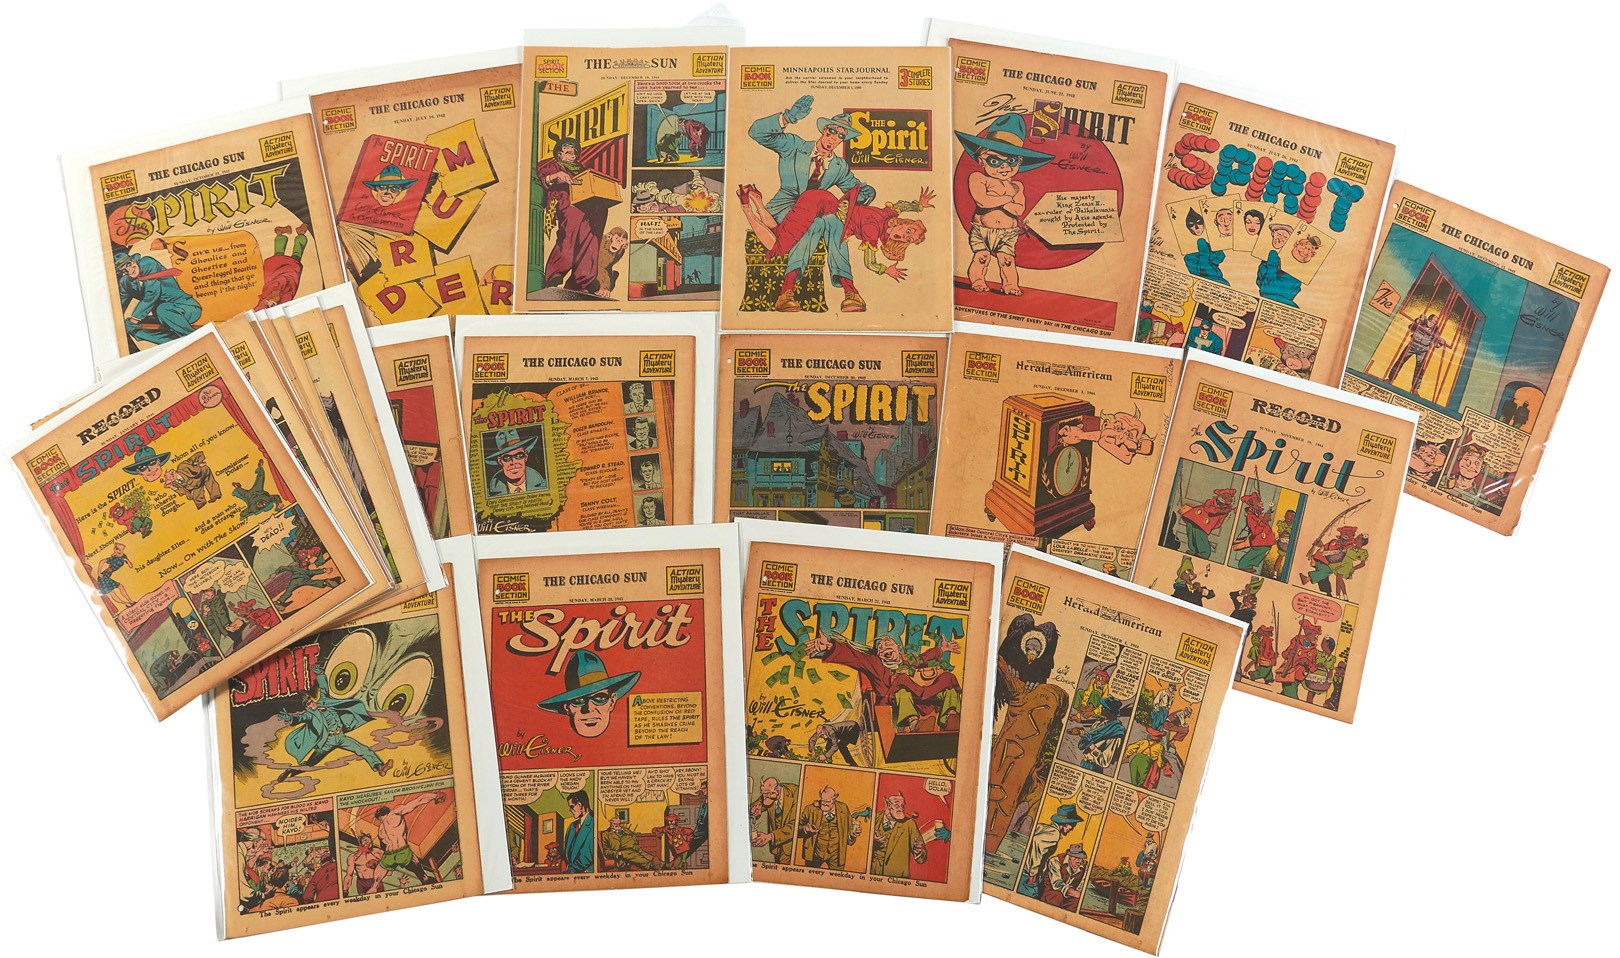 Comics - 1940s "The Spirit" Newspaper Comic Book Section Collection (135)